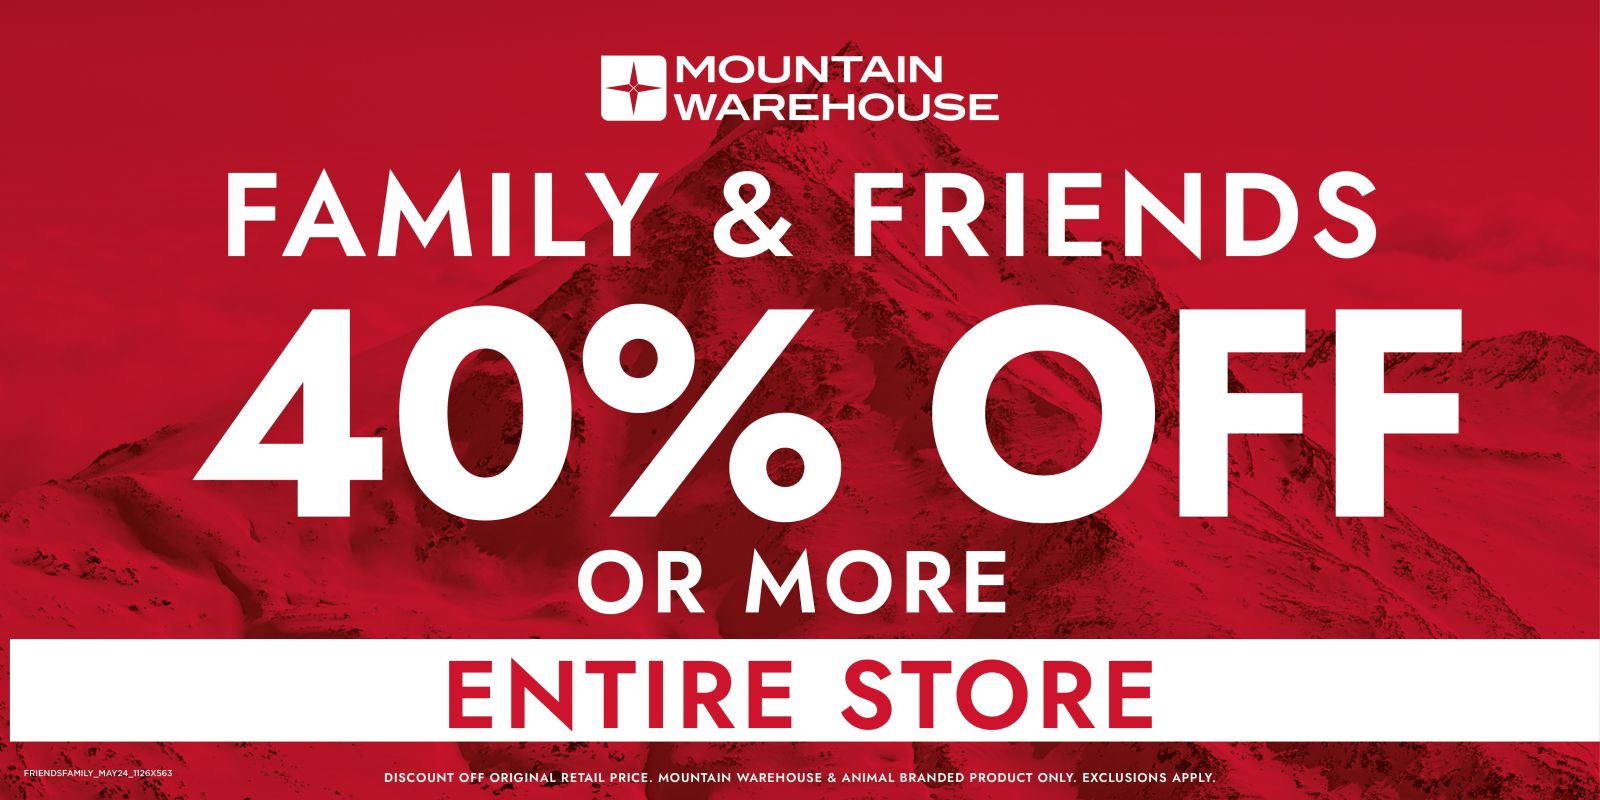 Family & Friends 40% off